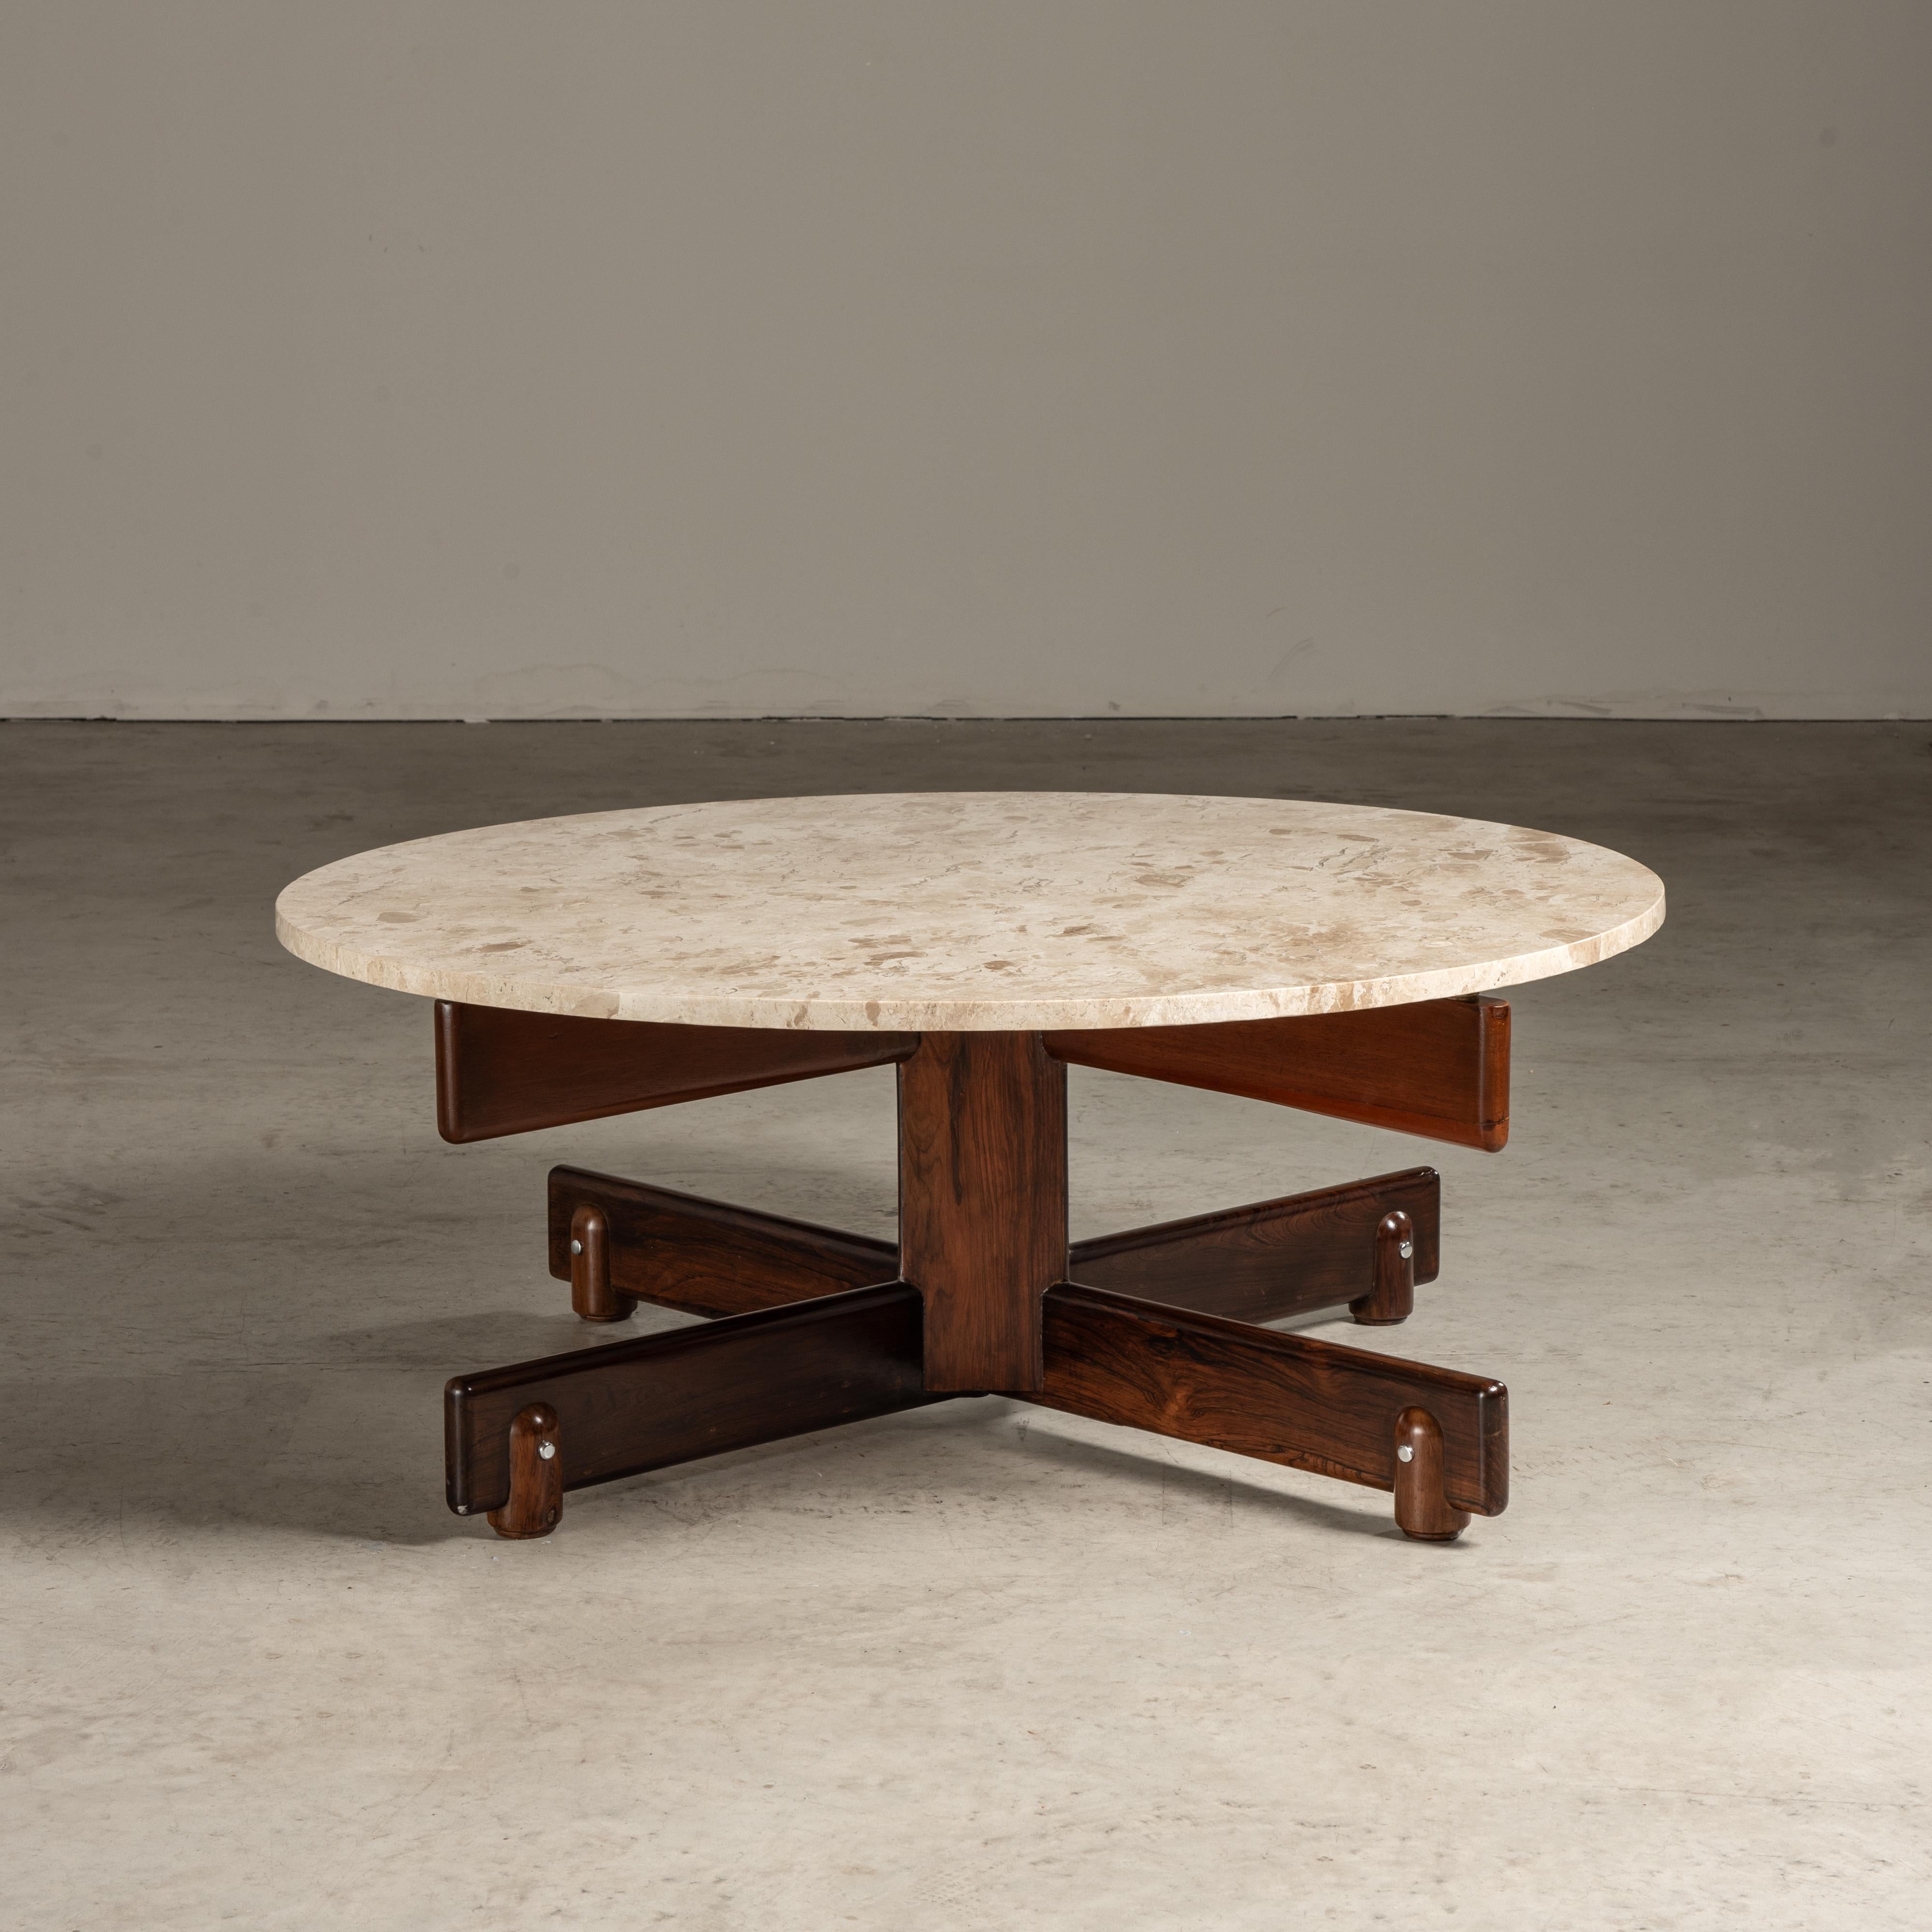 The Alex coffee table, designed by the esteemed Brazilian designer Sergio Rodrigues in 1960, is a testament to his ability to create furniture that captures the essence of Brazil's character and spirit. The table is notable for its rounded top made